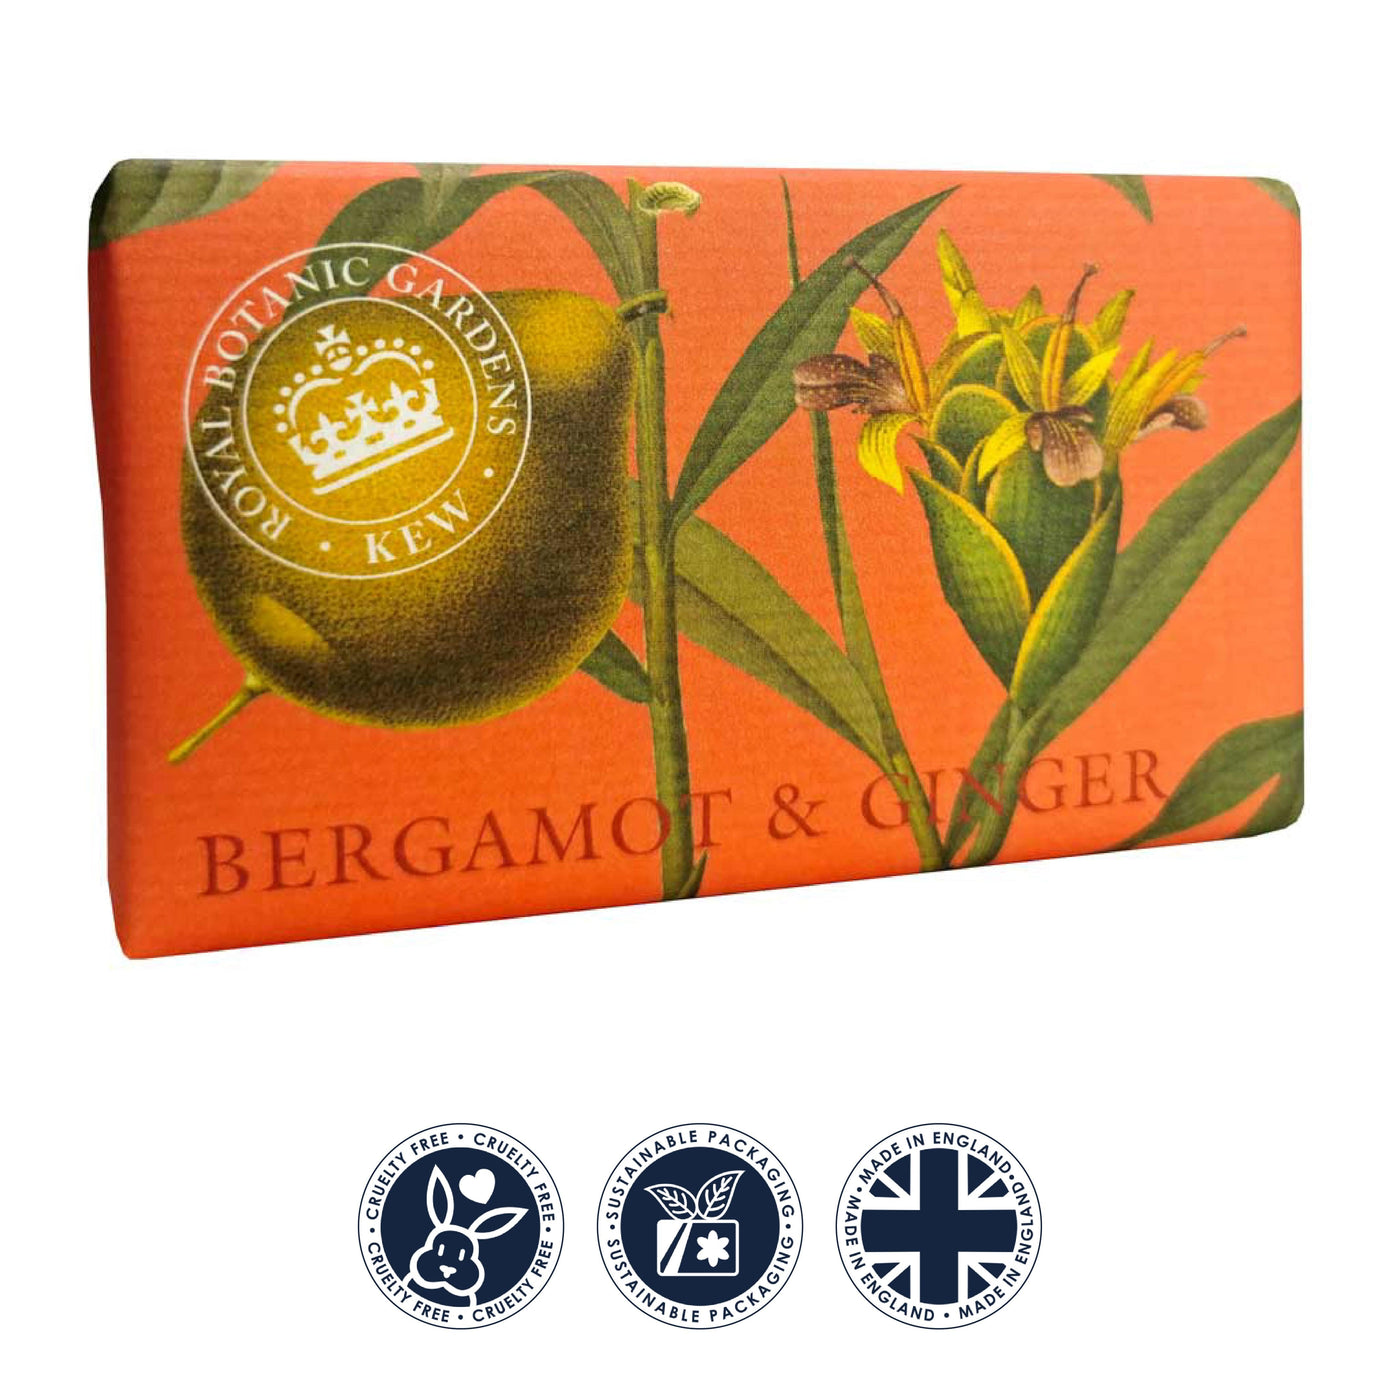 Kew Gardens Bergamot & Ginger Soap Bar from our Luxury Bar Soap collection by The English Soap Company